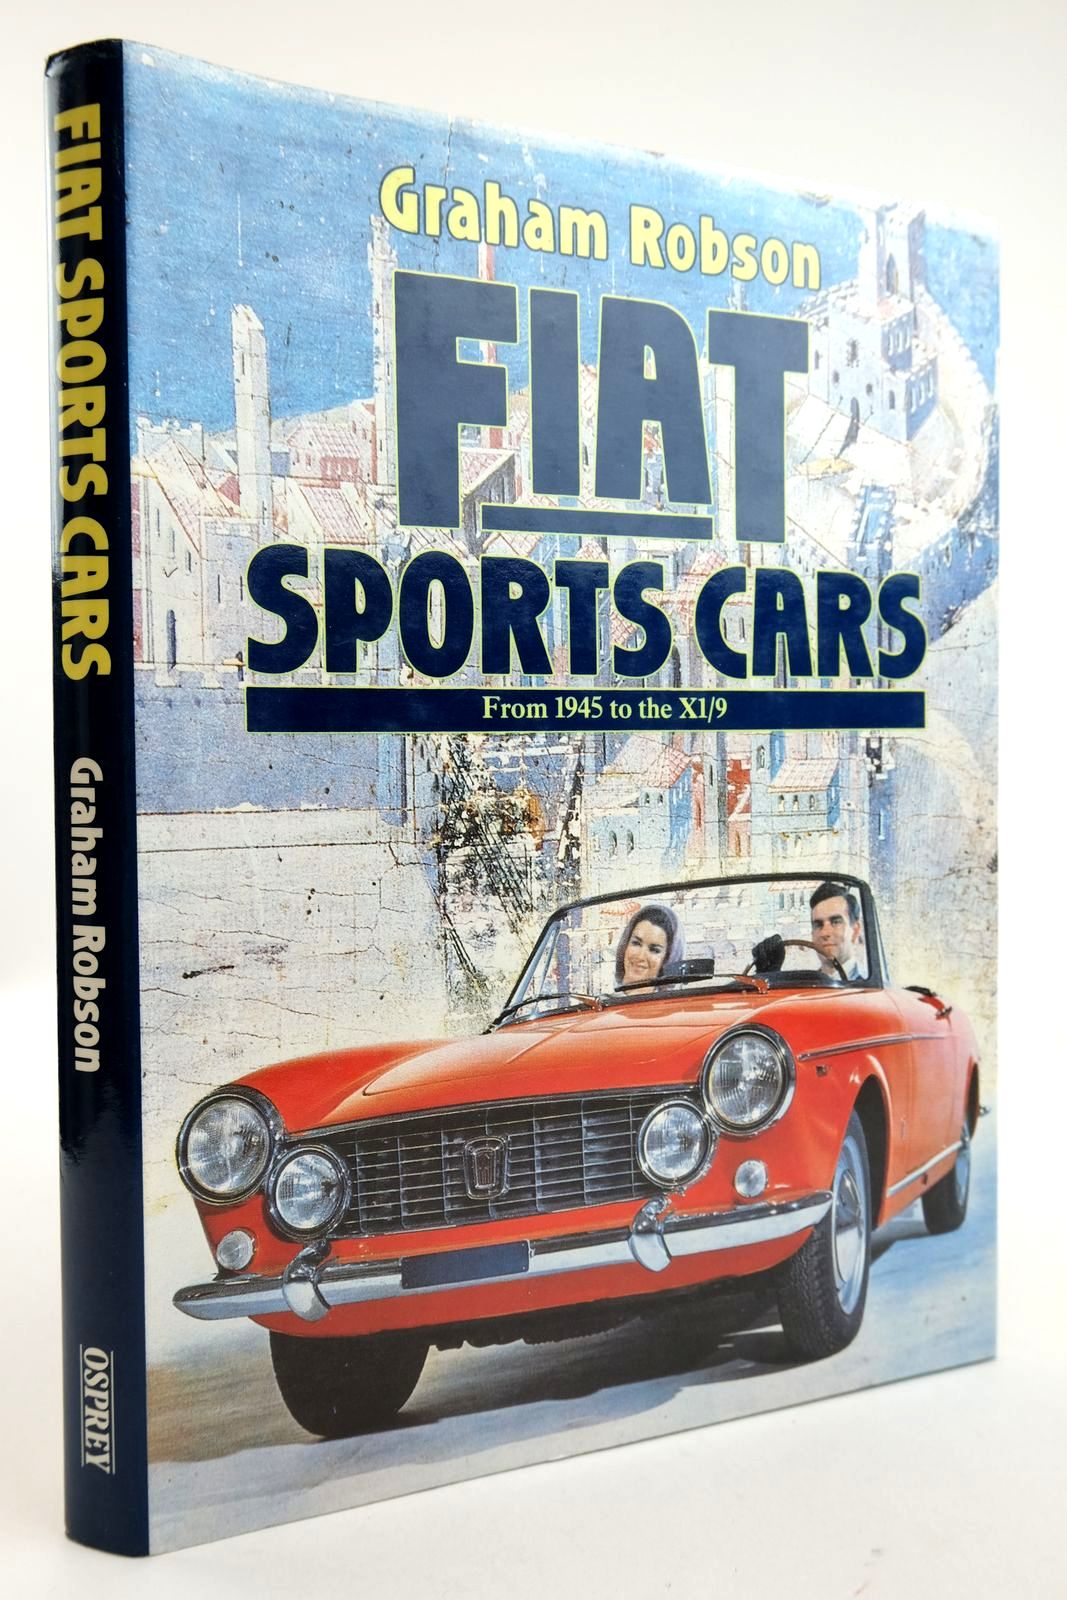 Photo of FIAT SPORTS CARS FROM 1945 TO THE XI/9 written by Robson, Graham published by Osprey Publishing (STOCK CODE: 2132847)  for sale by Stella & Rose's Books